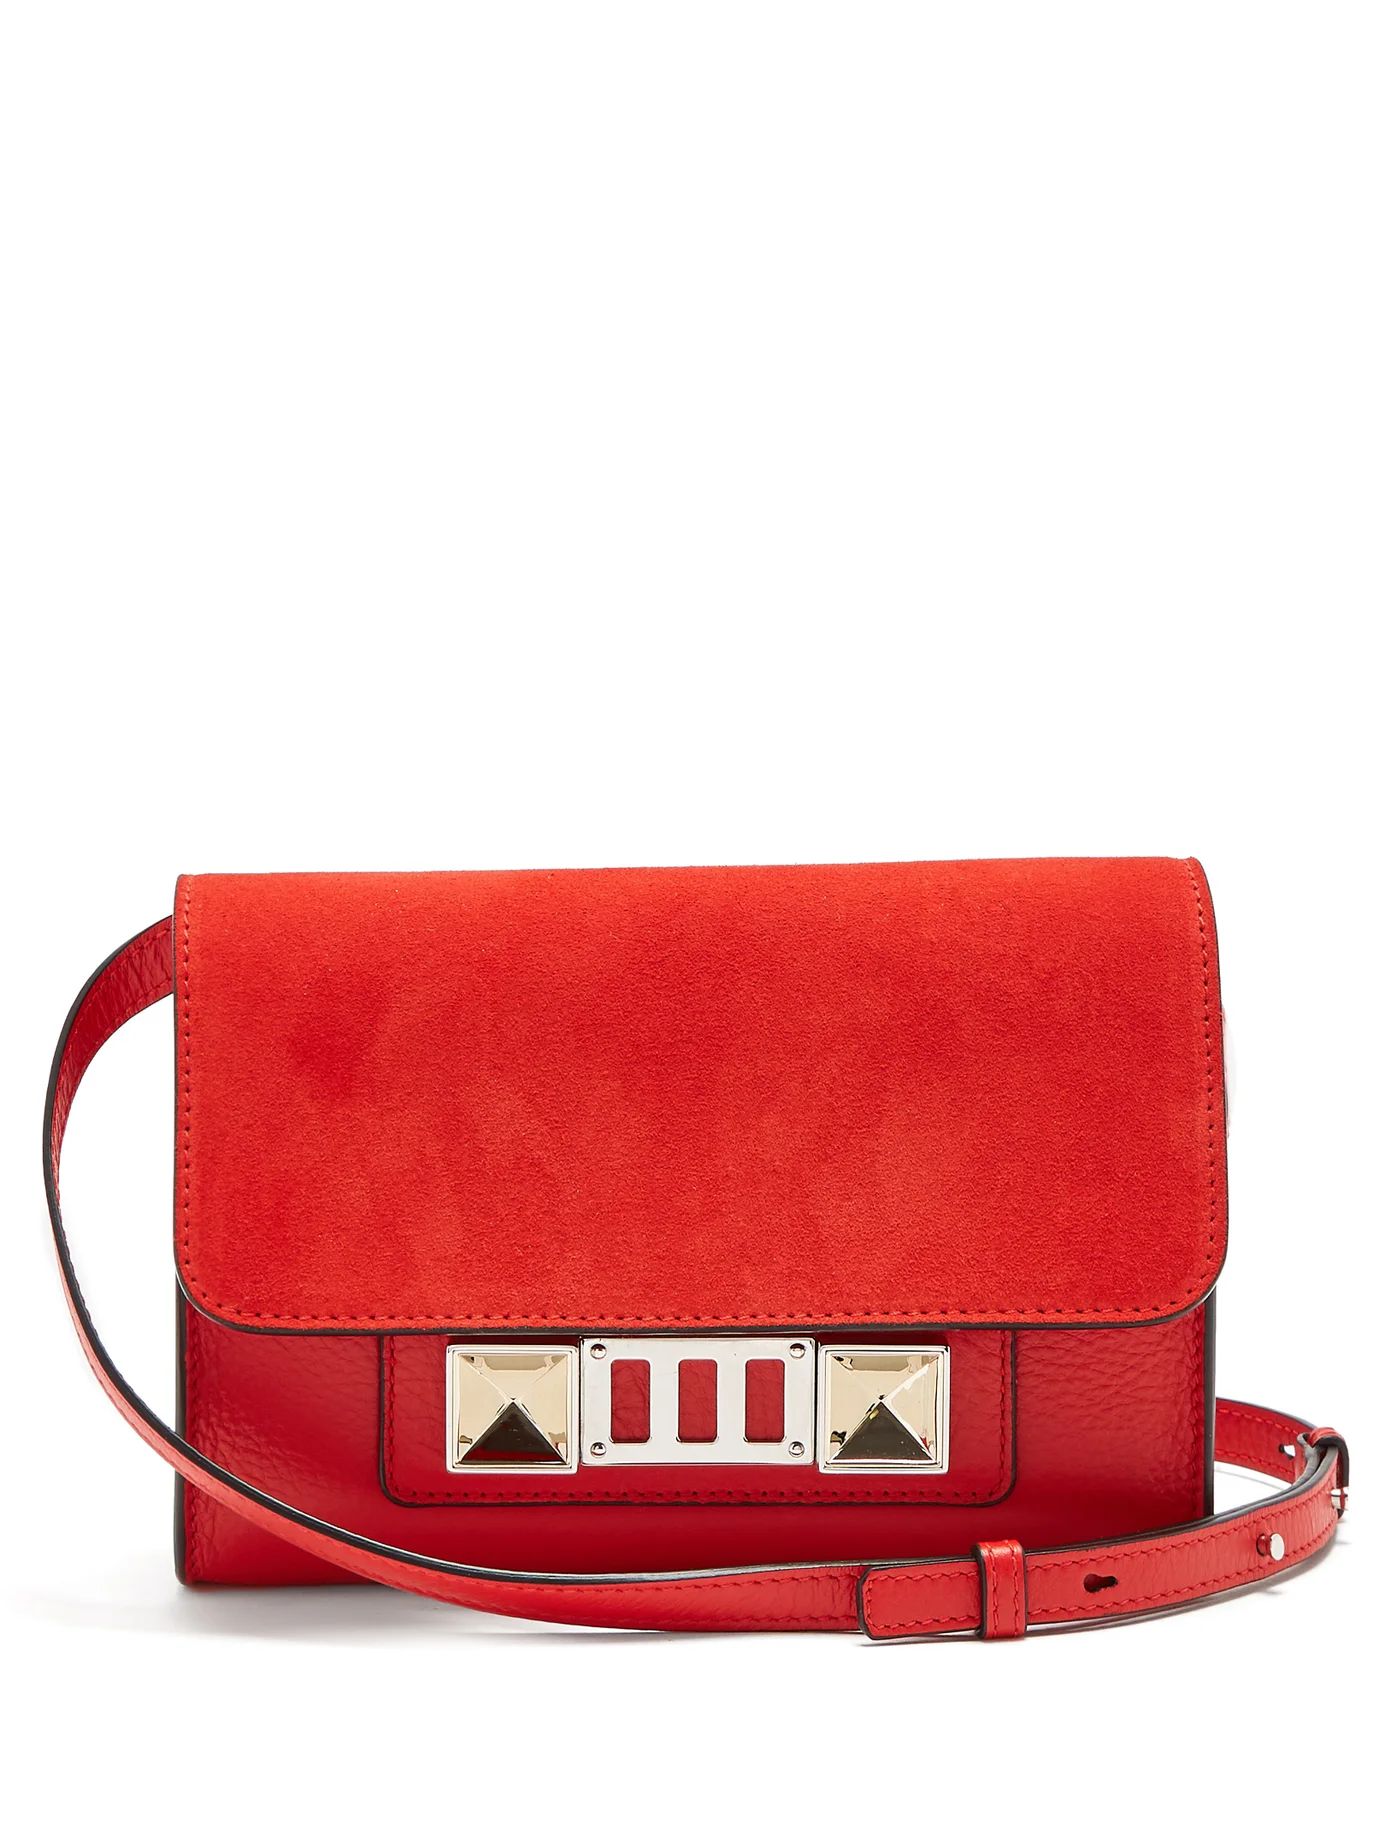 PS11 cross-body wallet bag | Matches (US)